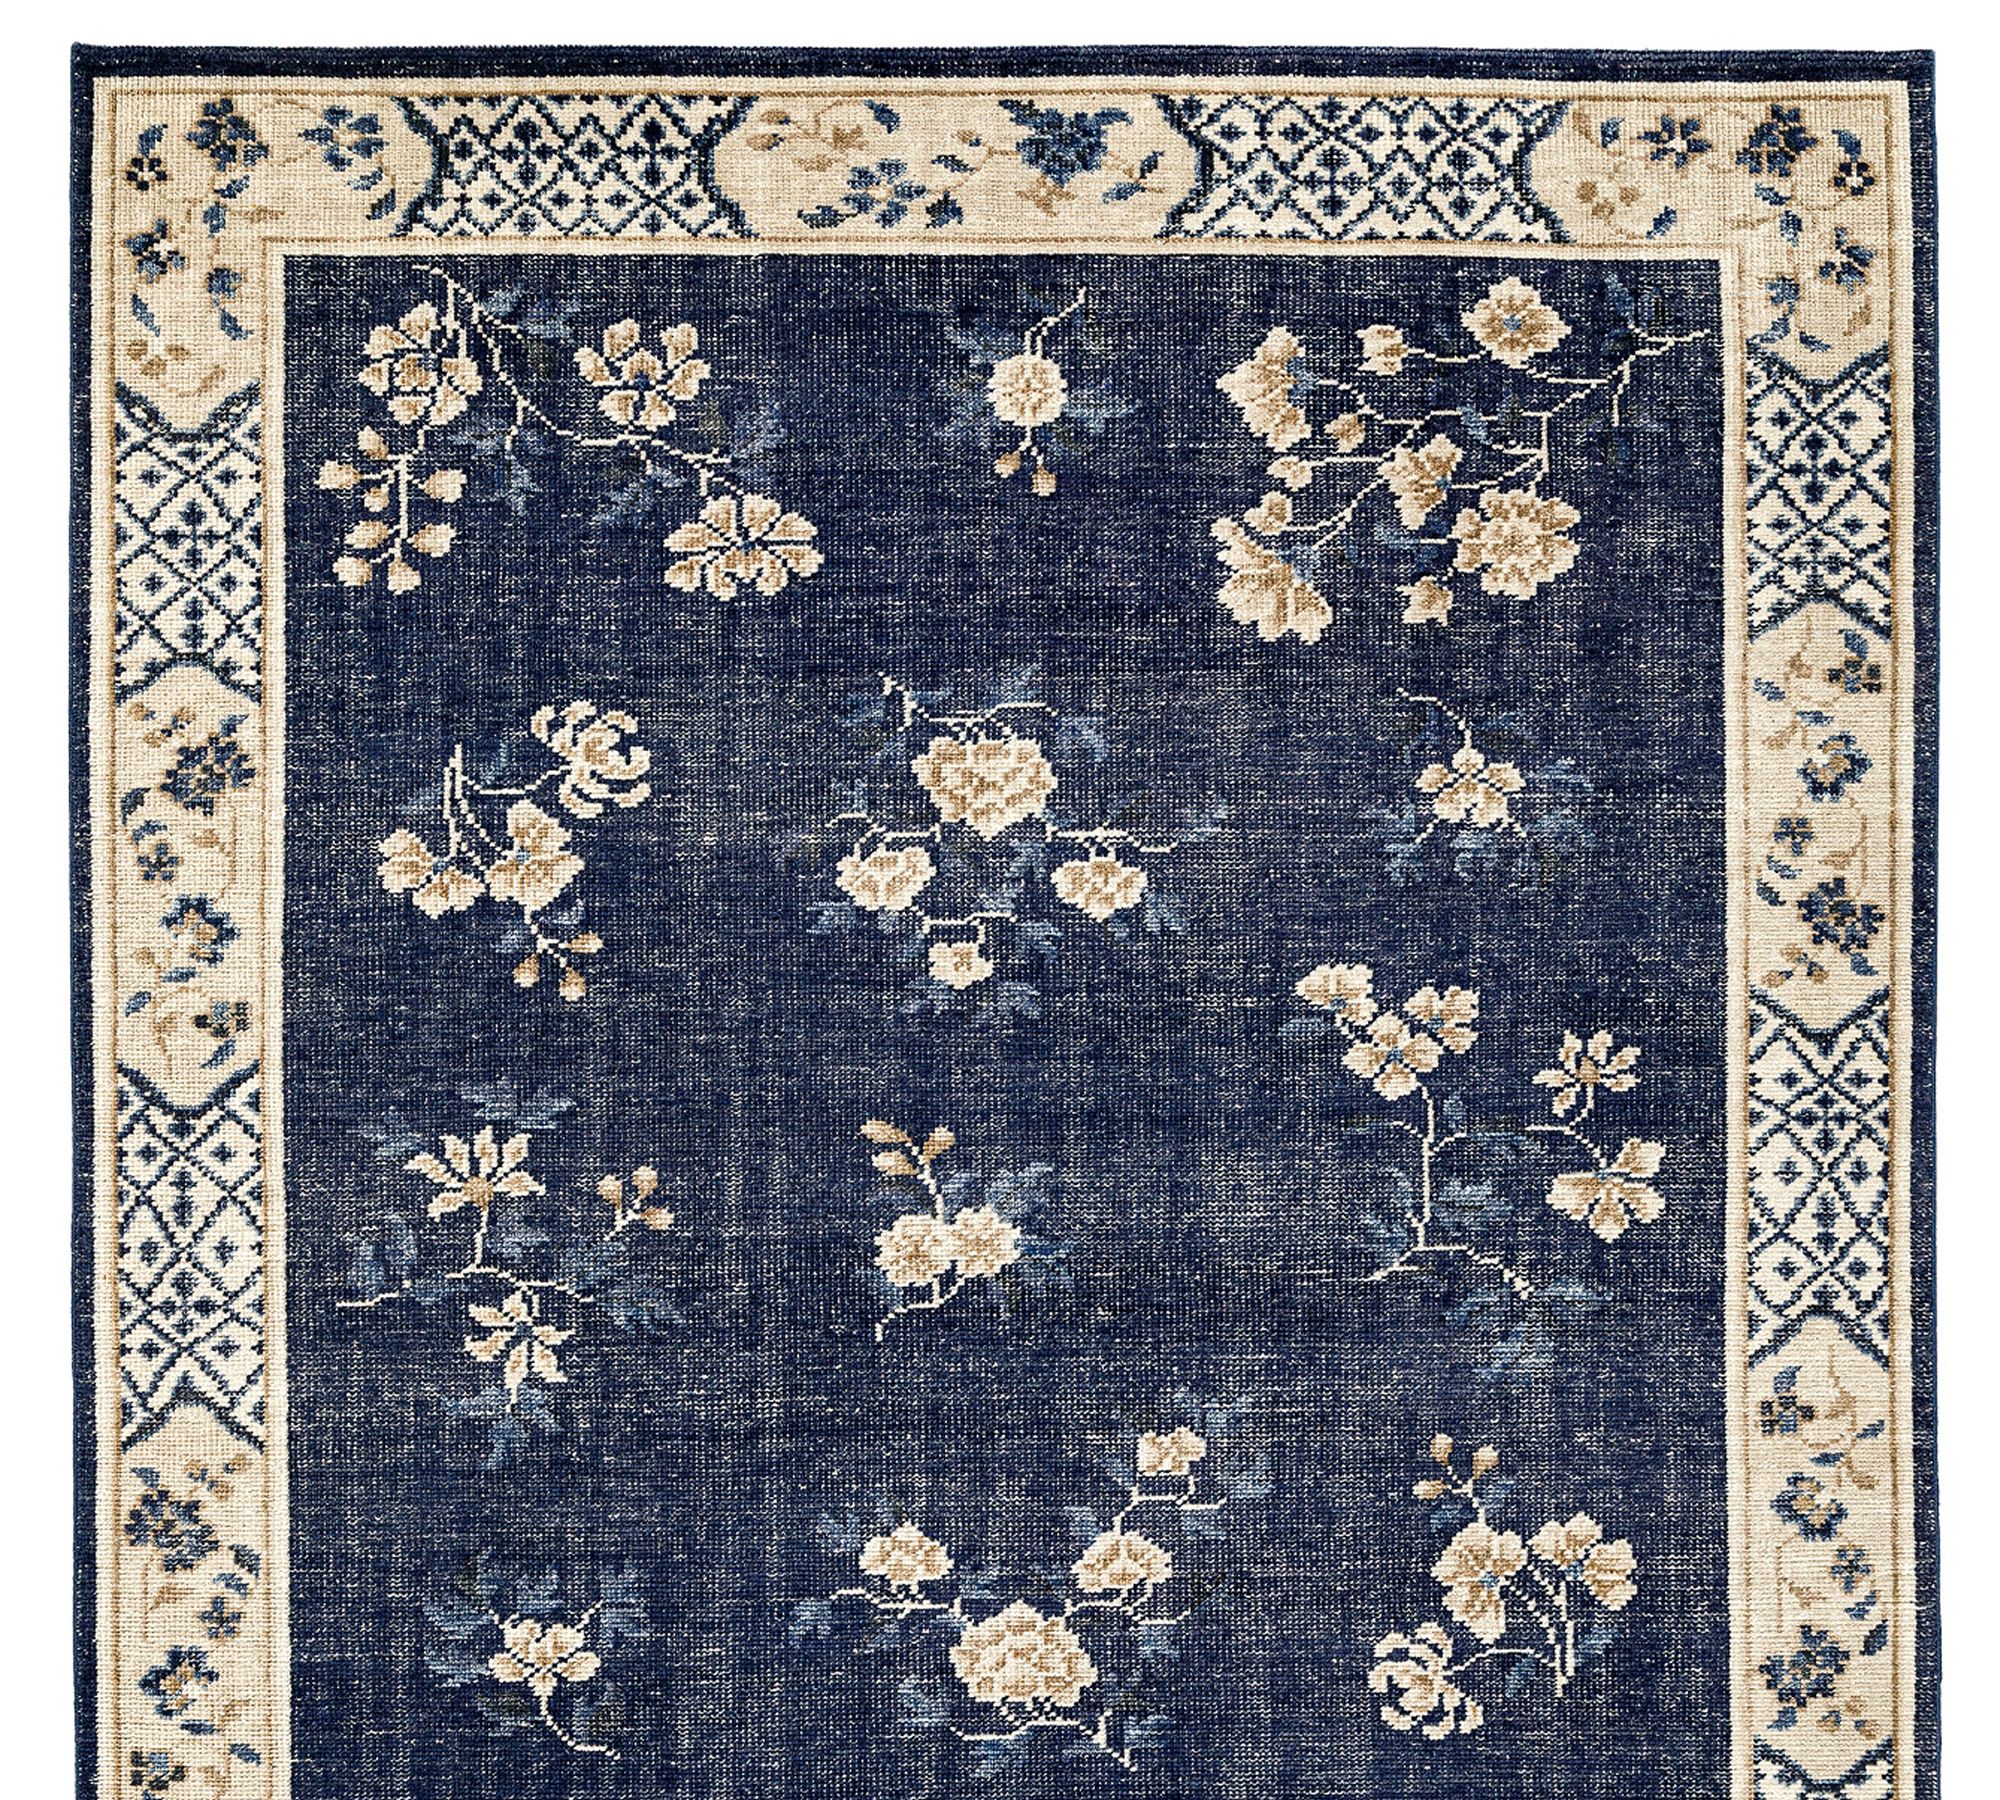 Claire Handknotted Rug Swatch - Free Returns Within 30 Days